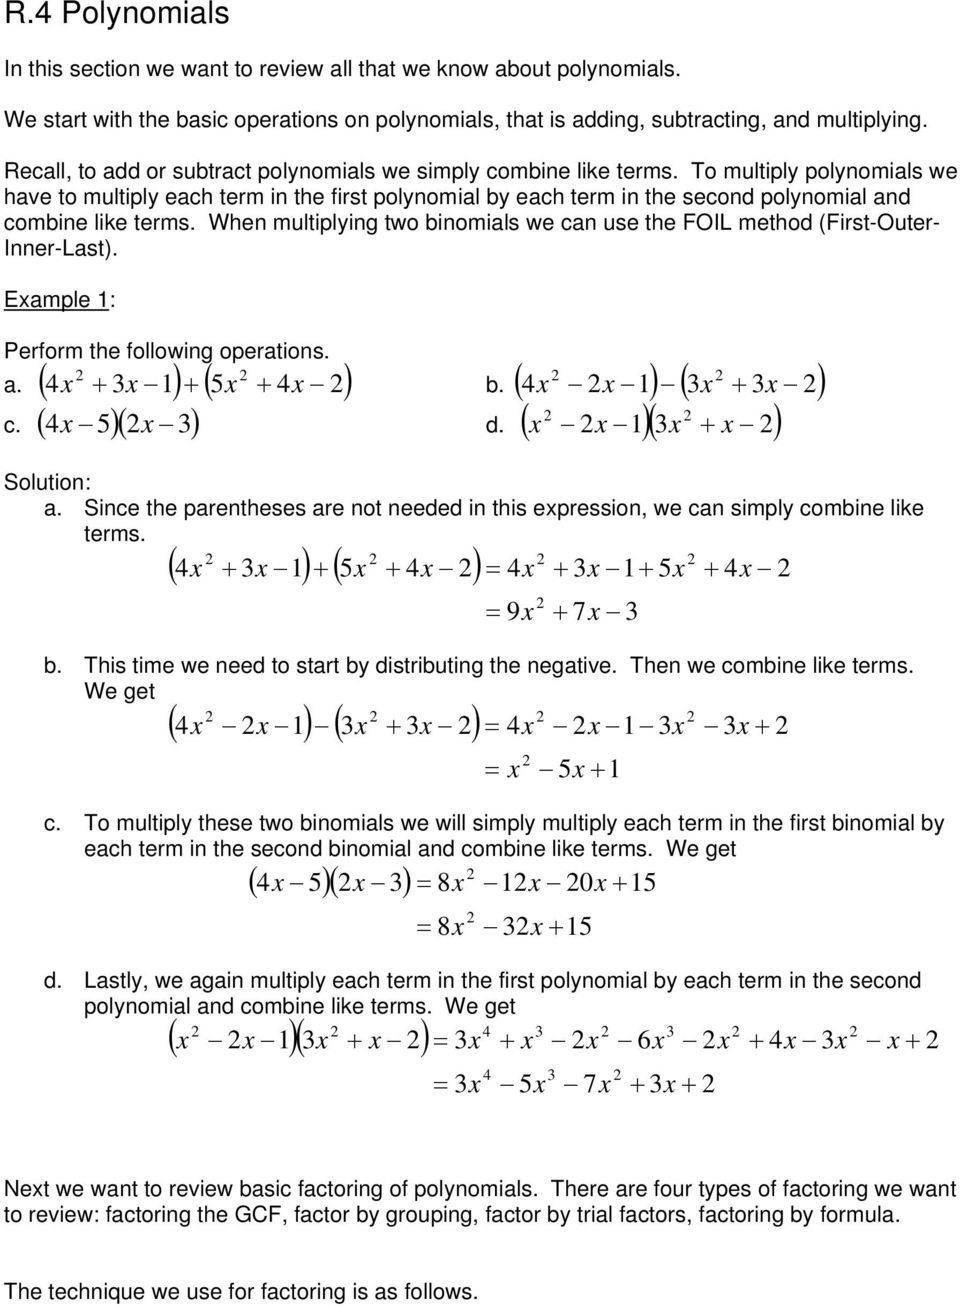 Operations with Polynomials Worksheet Operations with Polynomials Worksheet